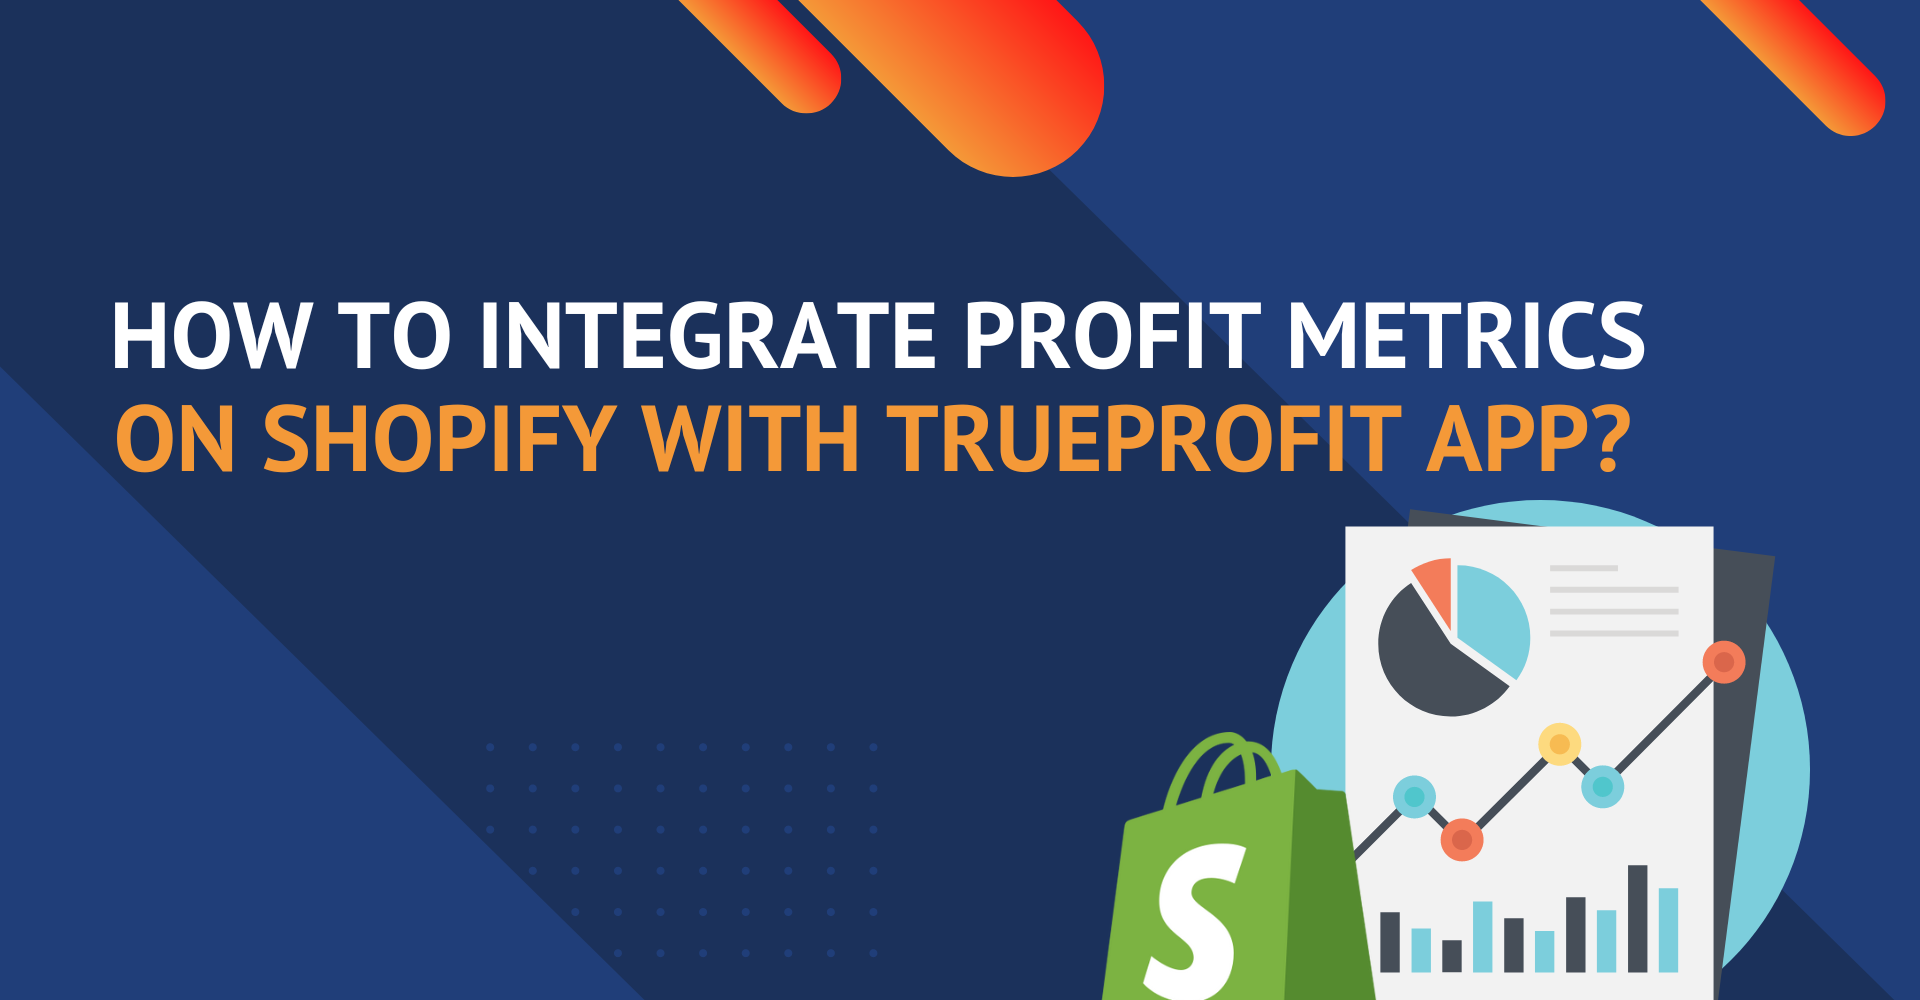 How to Integrate Profit Metrics On Shopify with TrueProfit App